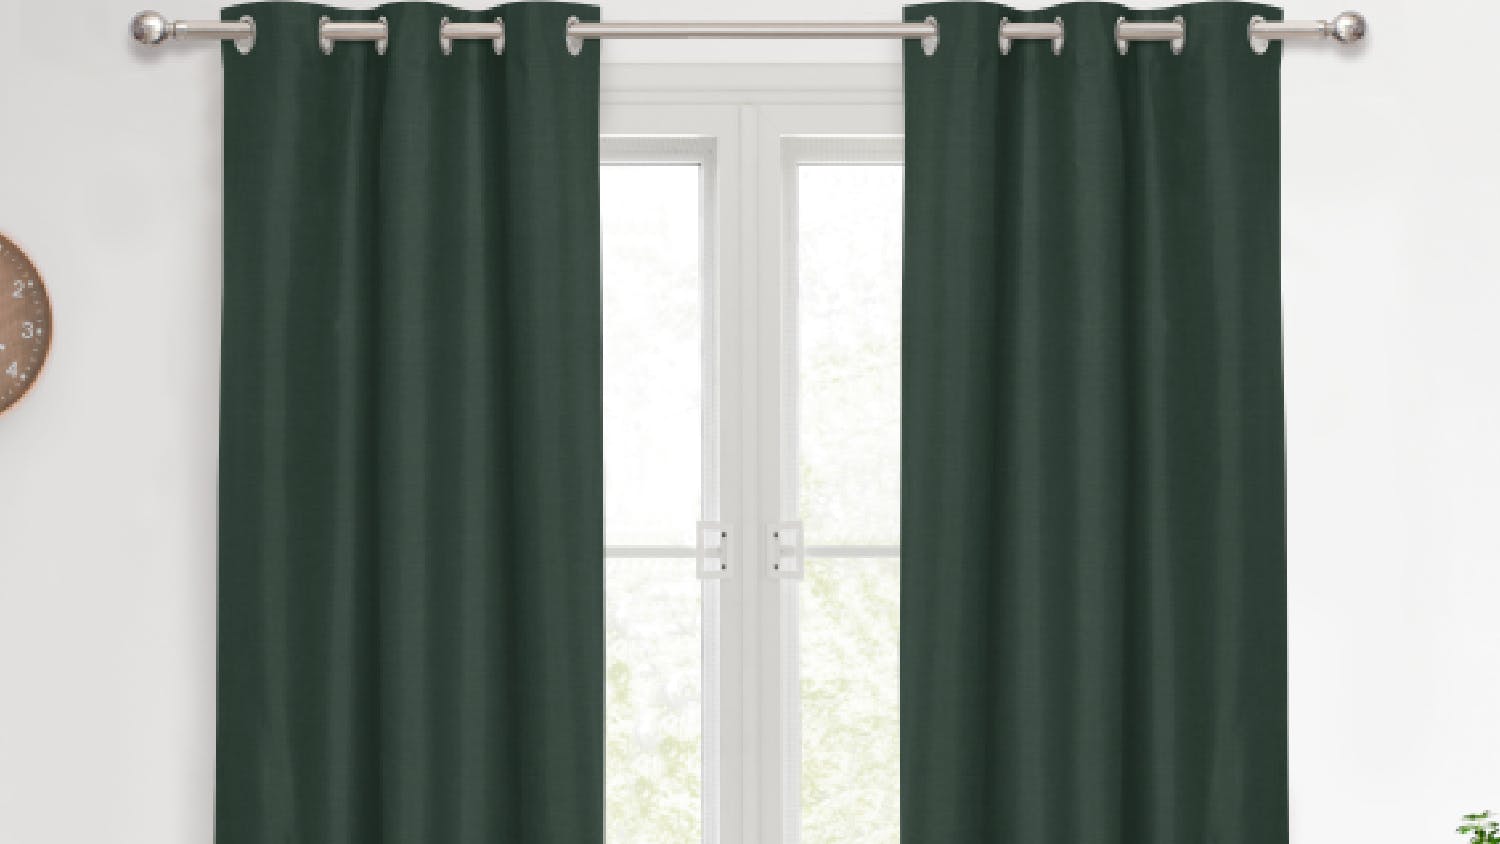 Sherwood Home Faux Linen Blackout Curtain Twin Pack 135 x 223cm - Forest Green